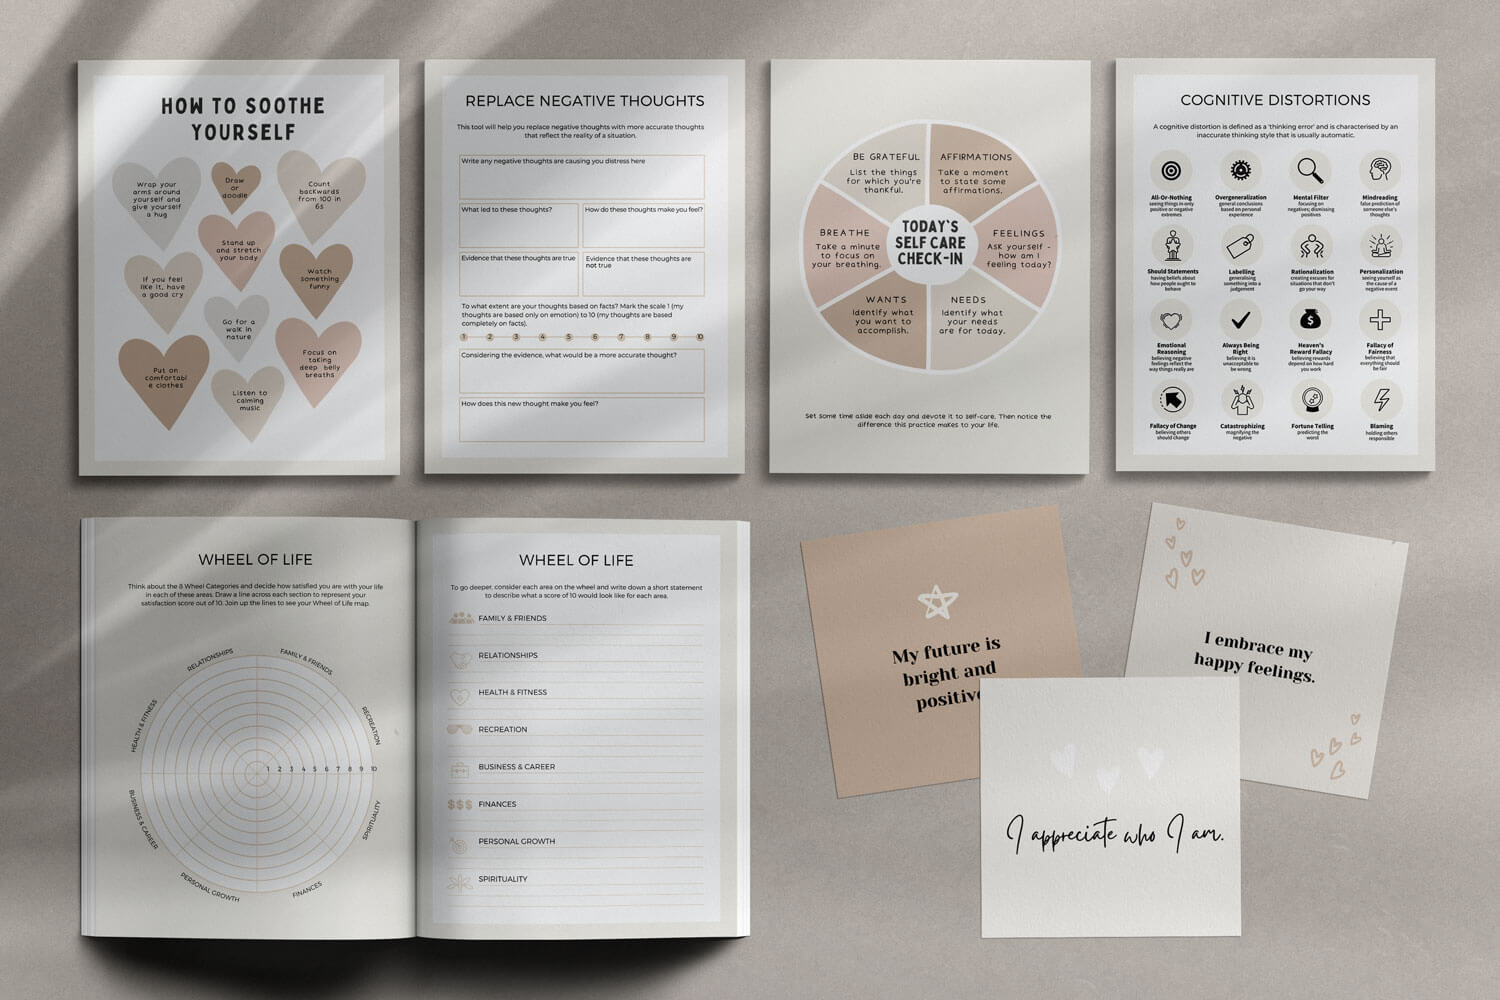 coaching tools, wheel of life worksheet, self care tools, cognitive distortions worksheet, affirmation card templates 